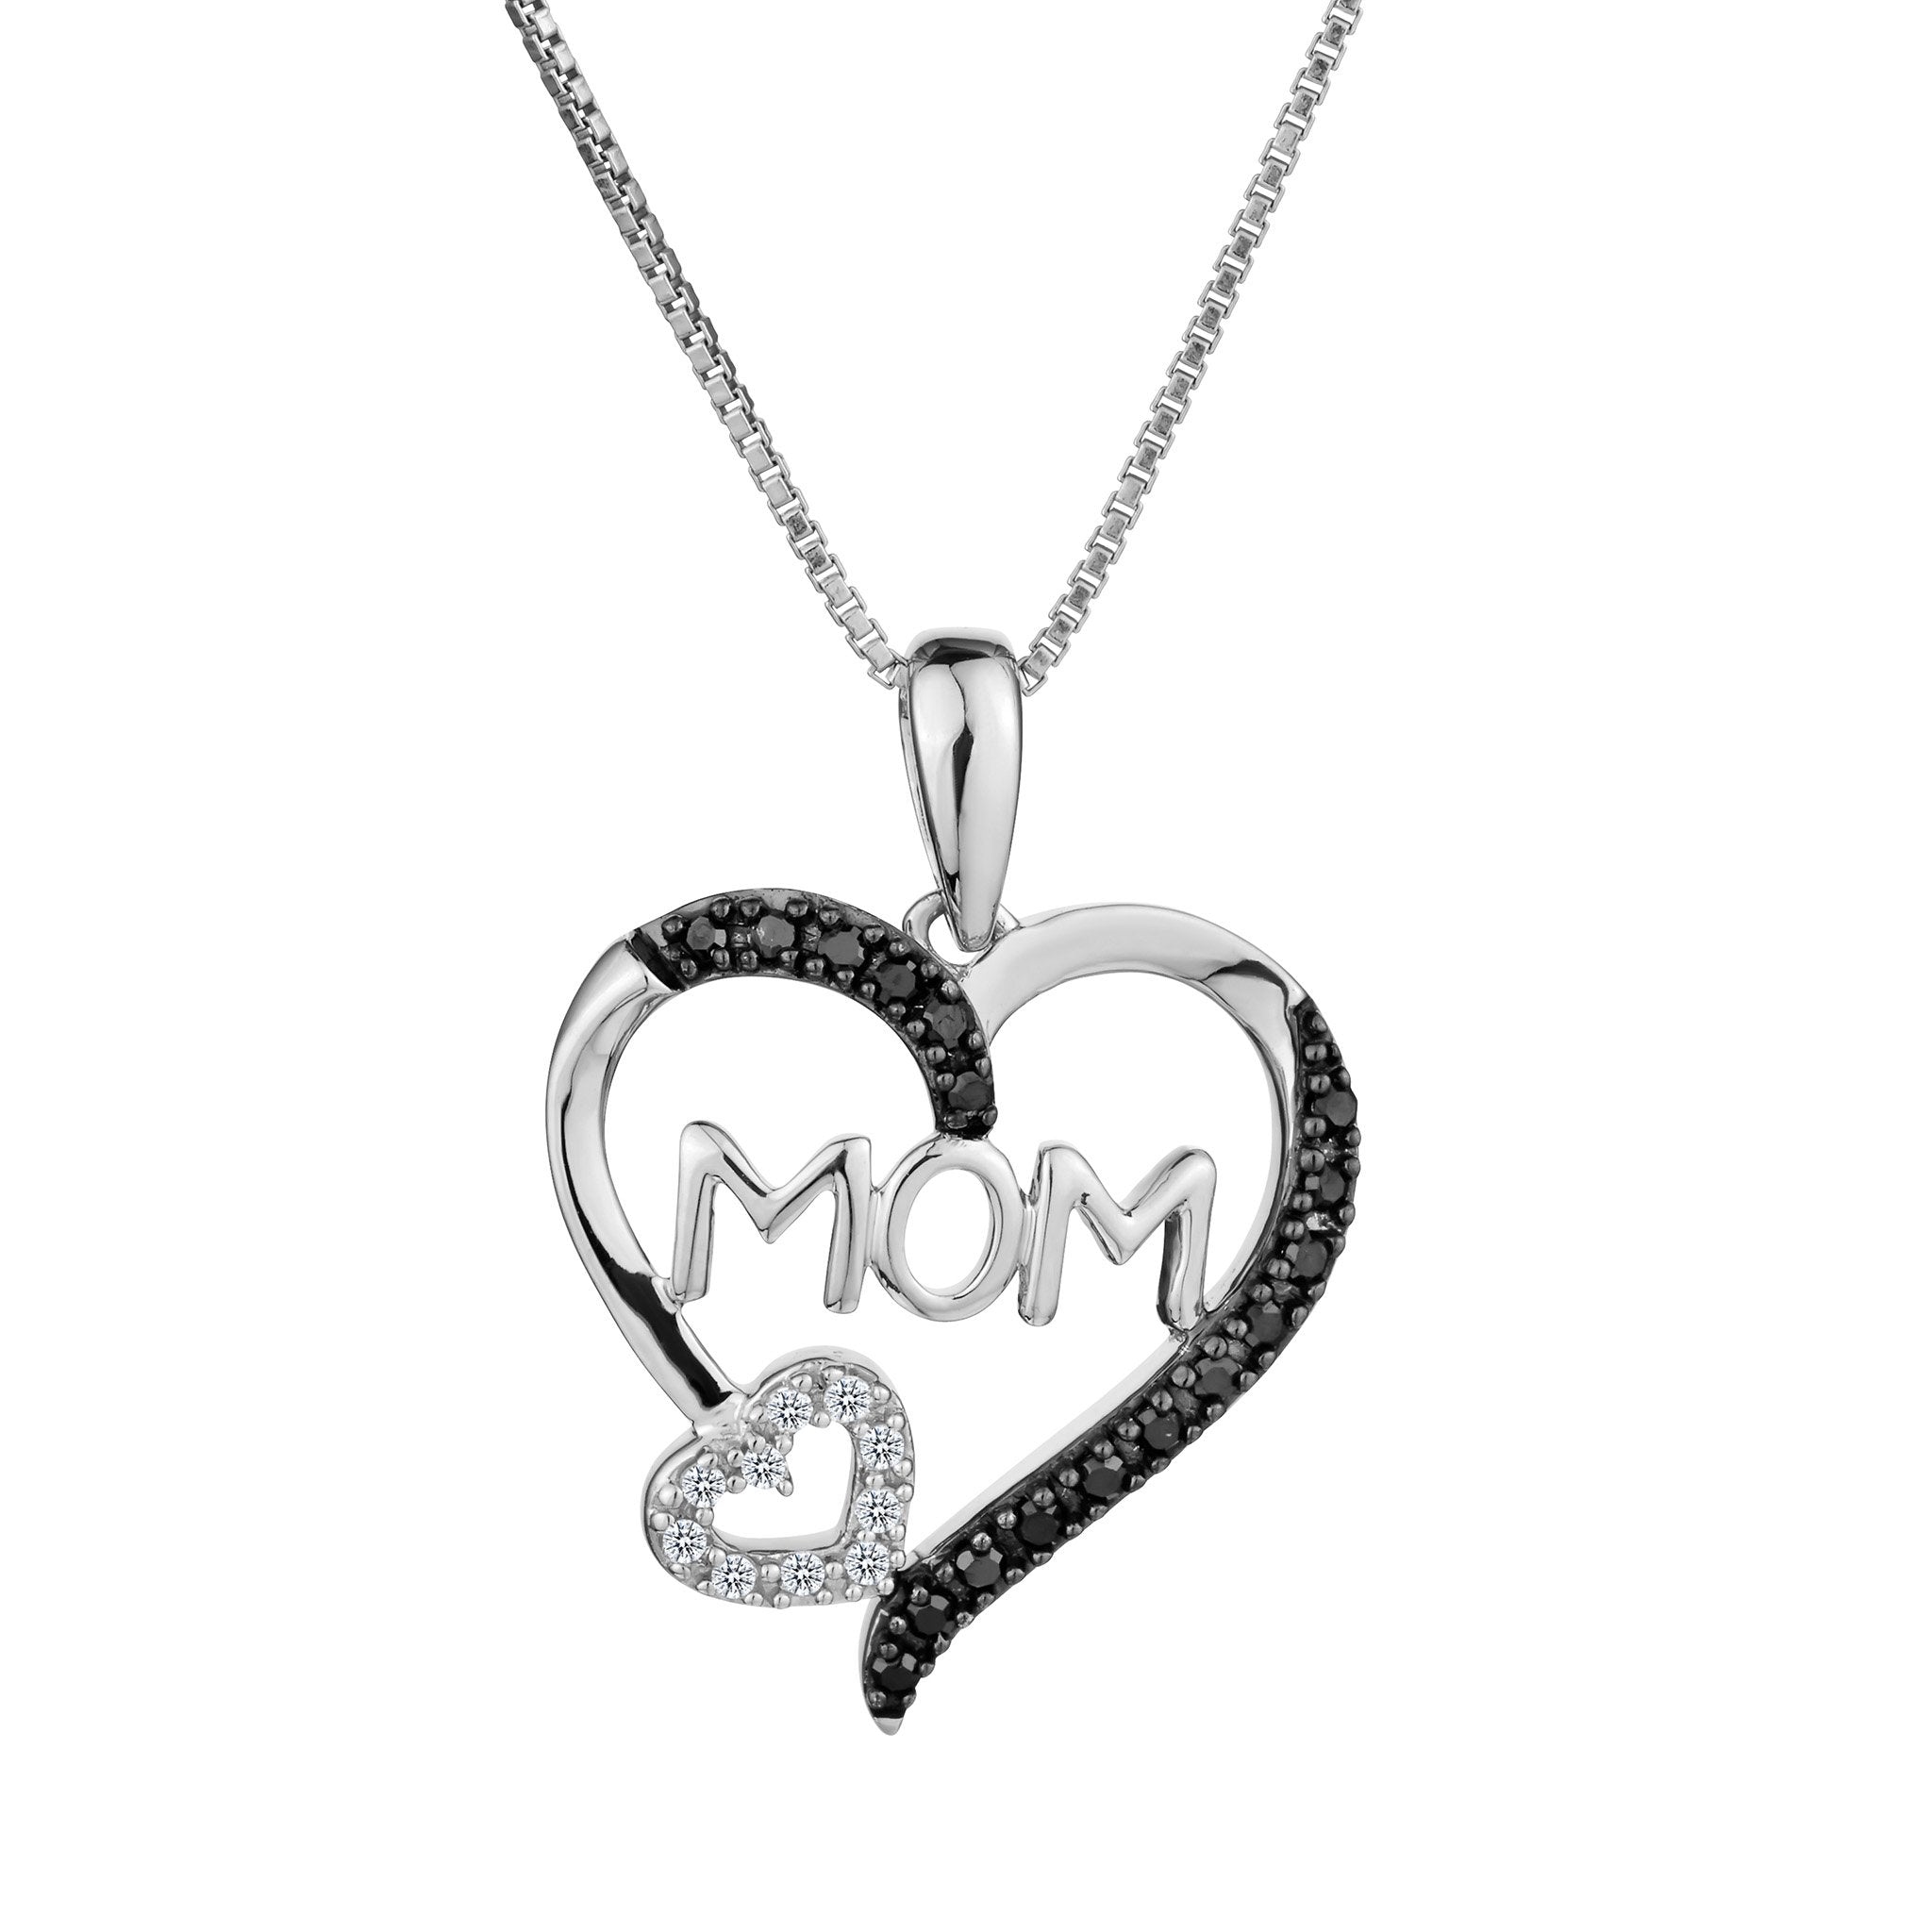 .12 Carat Black and White Diamond "MOM" Heart Pendant,  Sterling Silver. Necklaces and Pendants. Griffin Jewellery Designs.